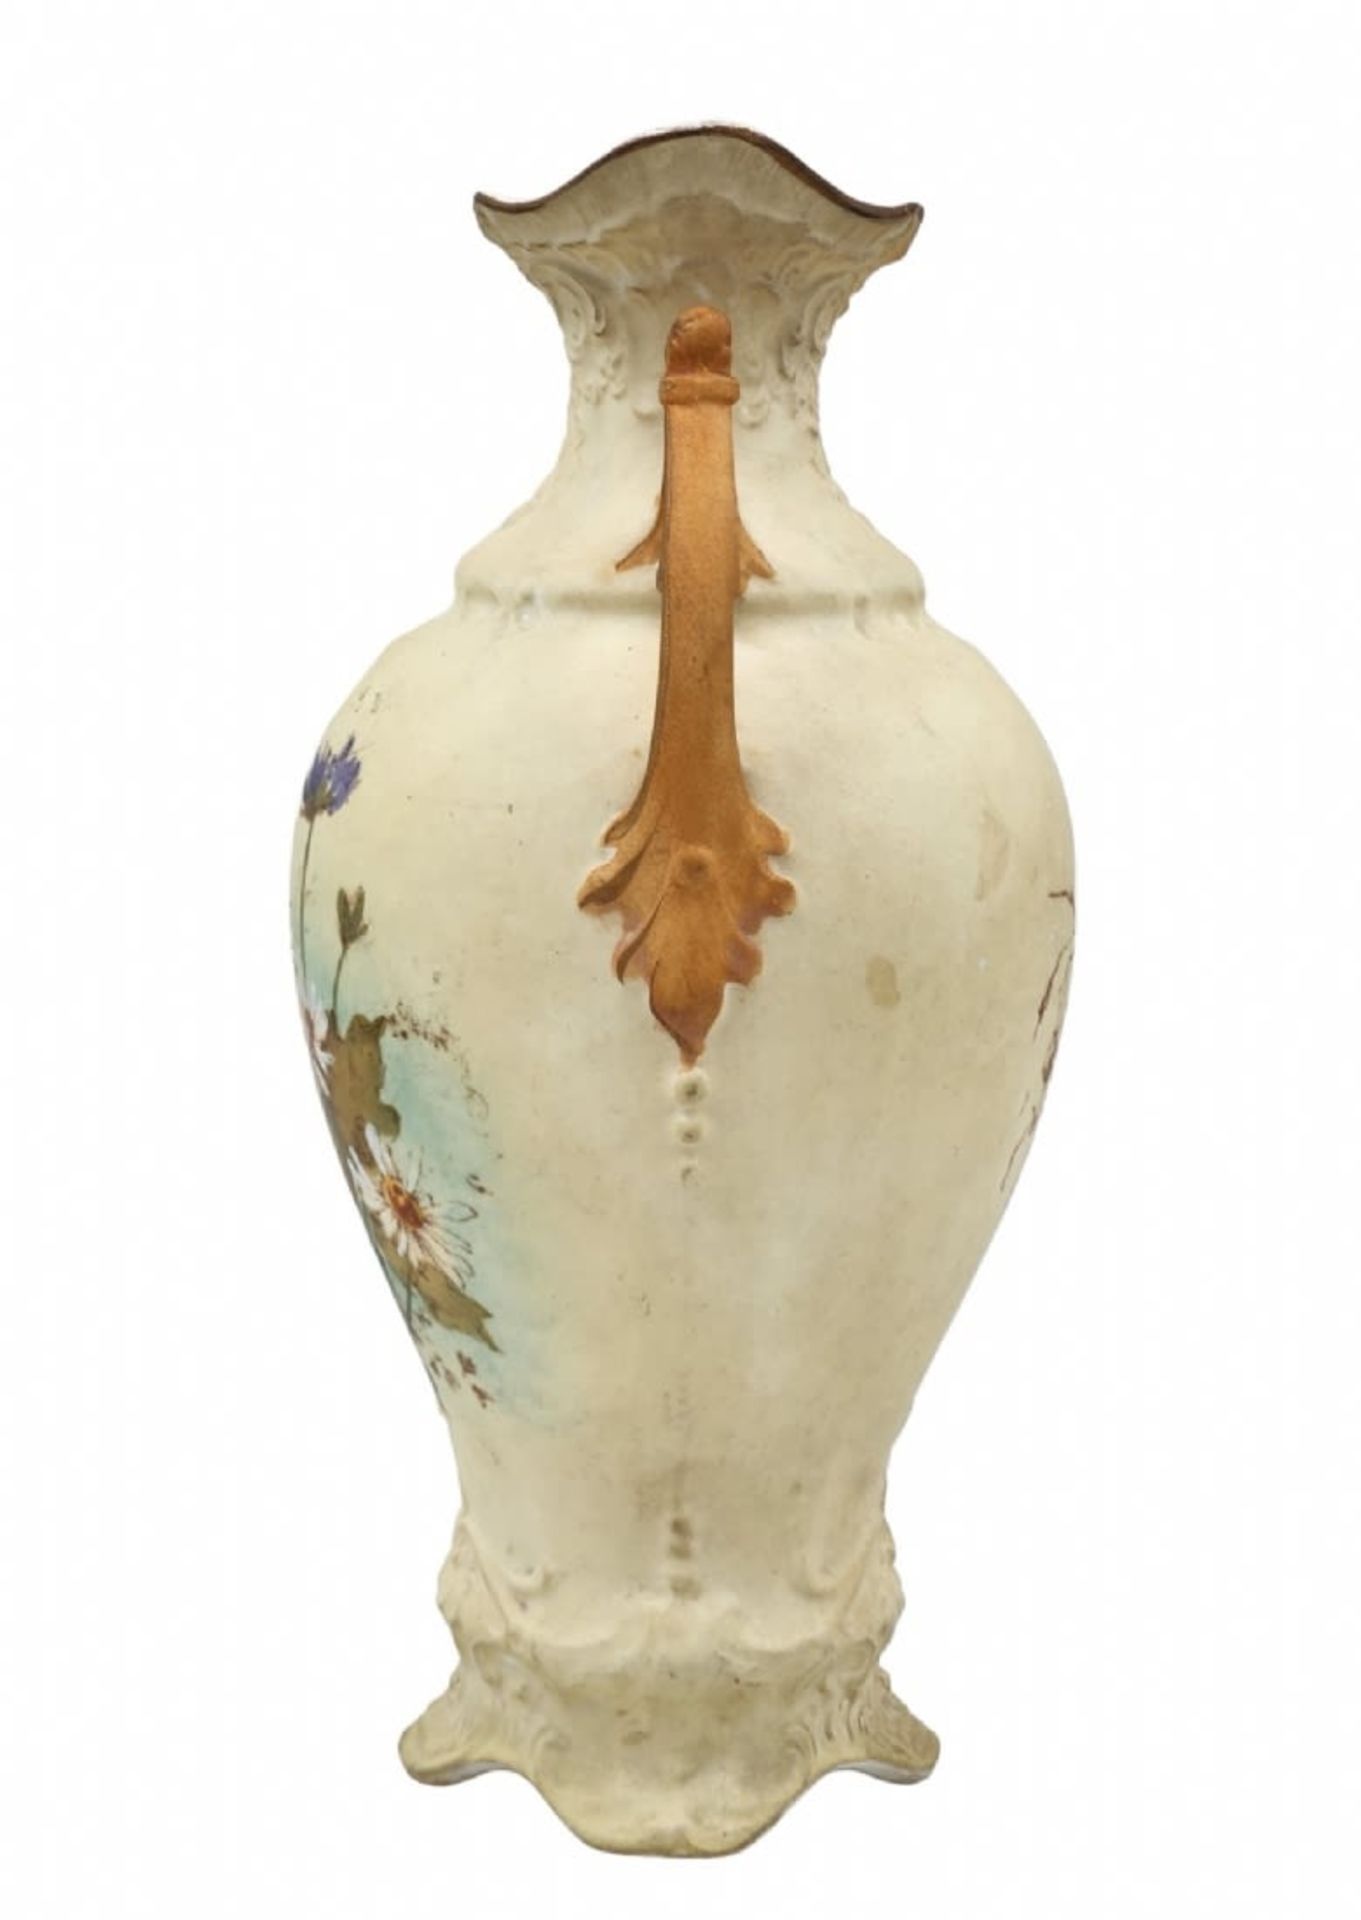 An antique Austrian vase from the last quarter of the 19th century, made of porcelain decorated, - Image 3 of 5